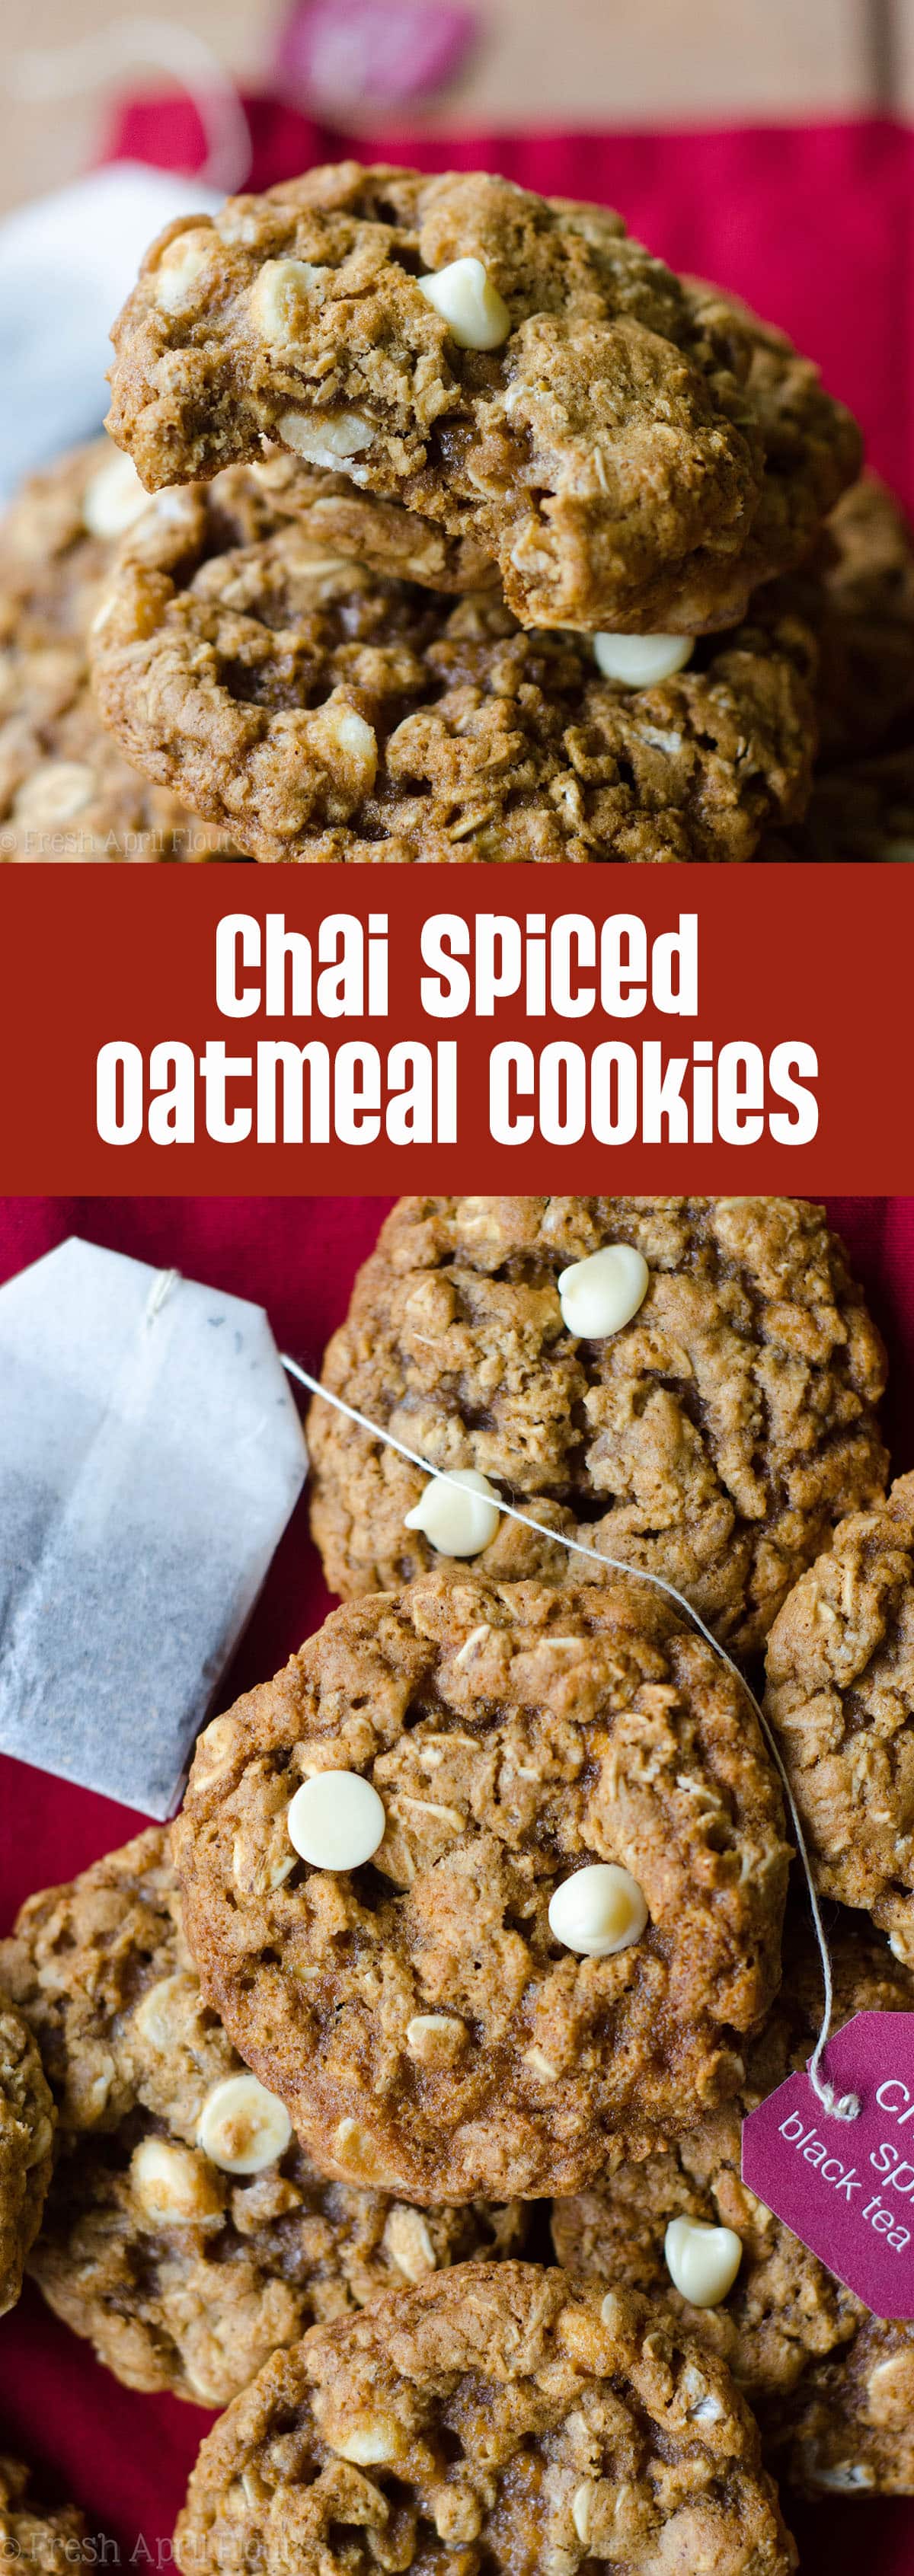 Chai Spiced Oatmeal Cookies: Classic oatmeal cookies get a spicy makeover with cinnamon, cardamom, and ginger. via @frshaprilflours